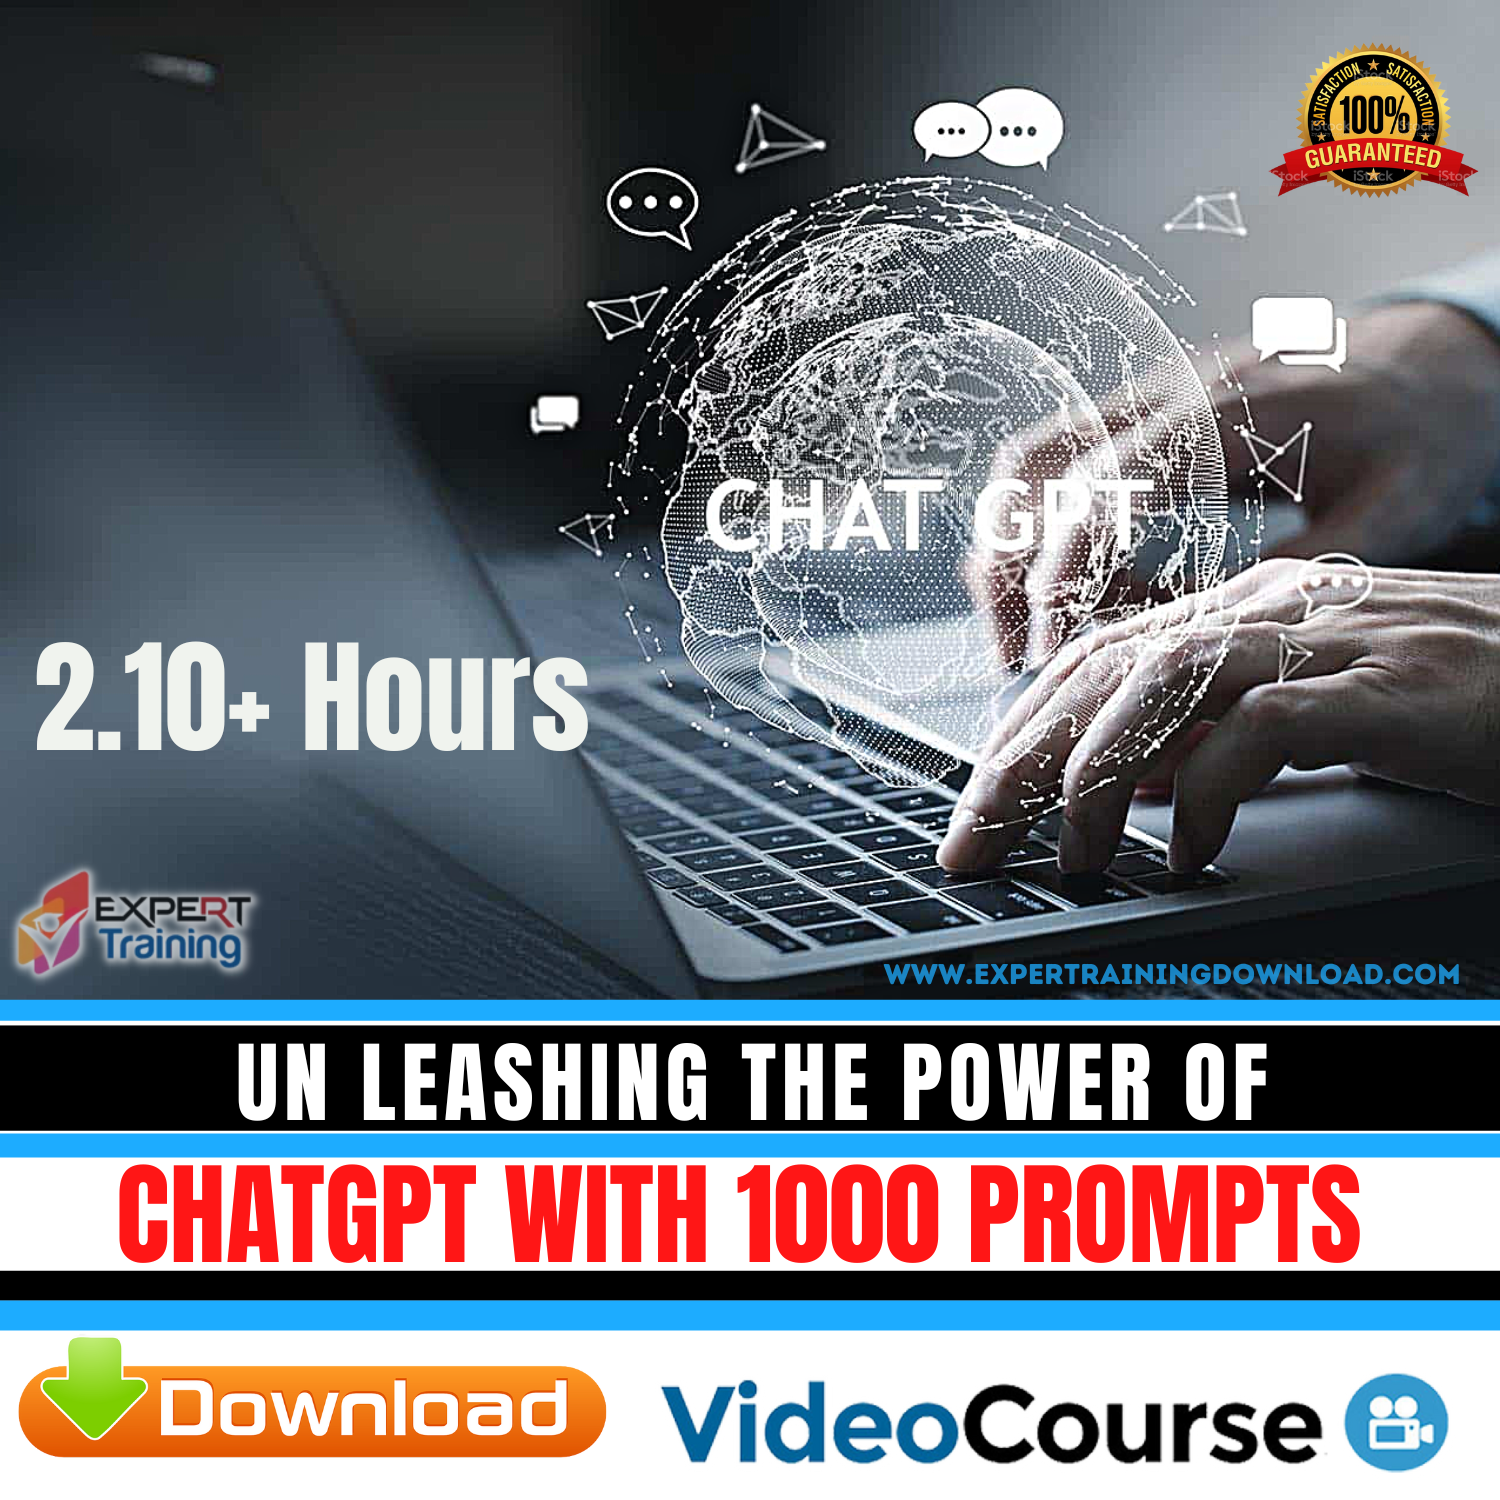 Un leashing the Power of ChatGPT with 1000 prompts